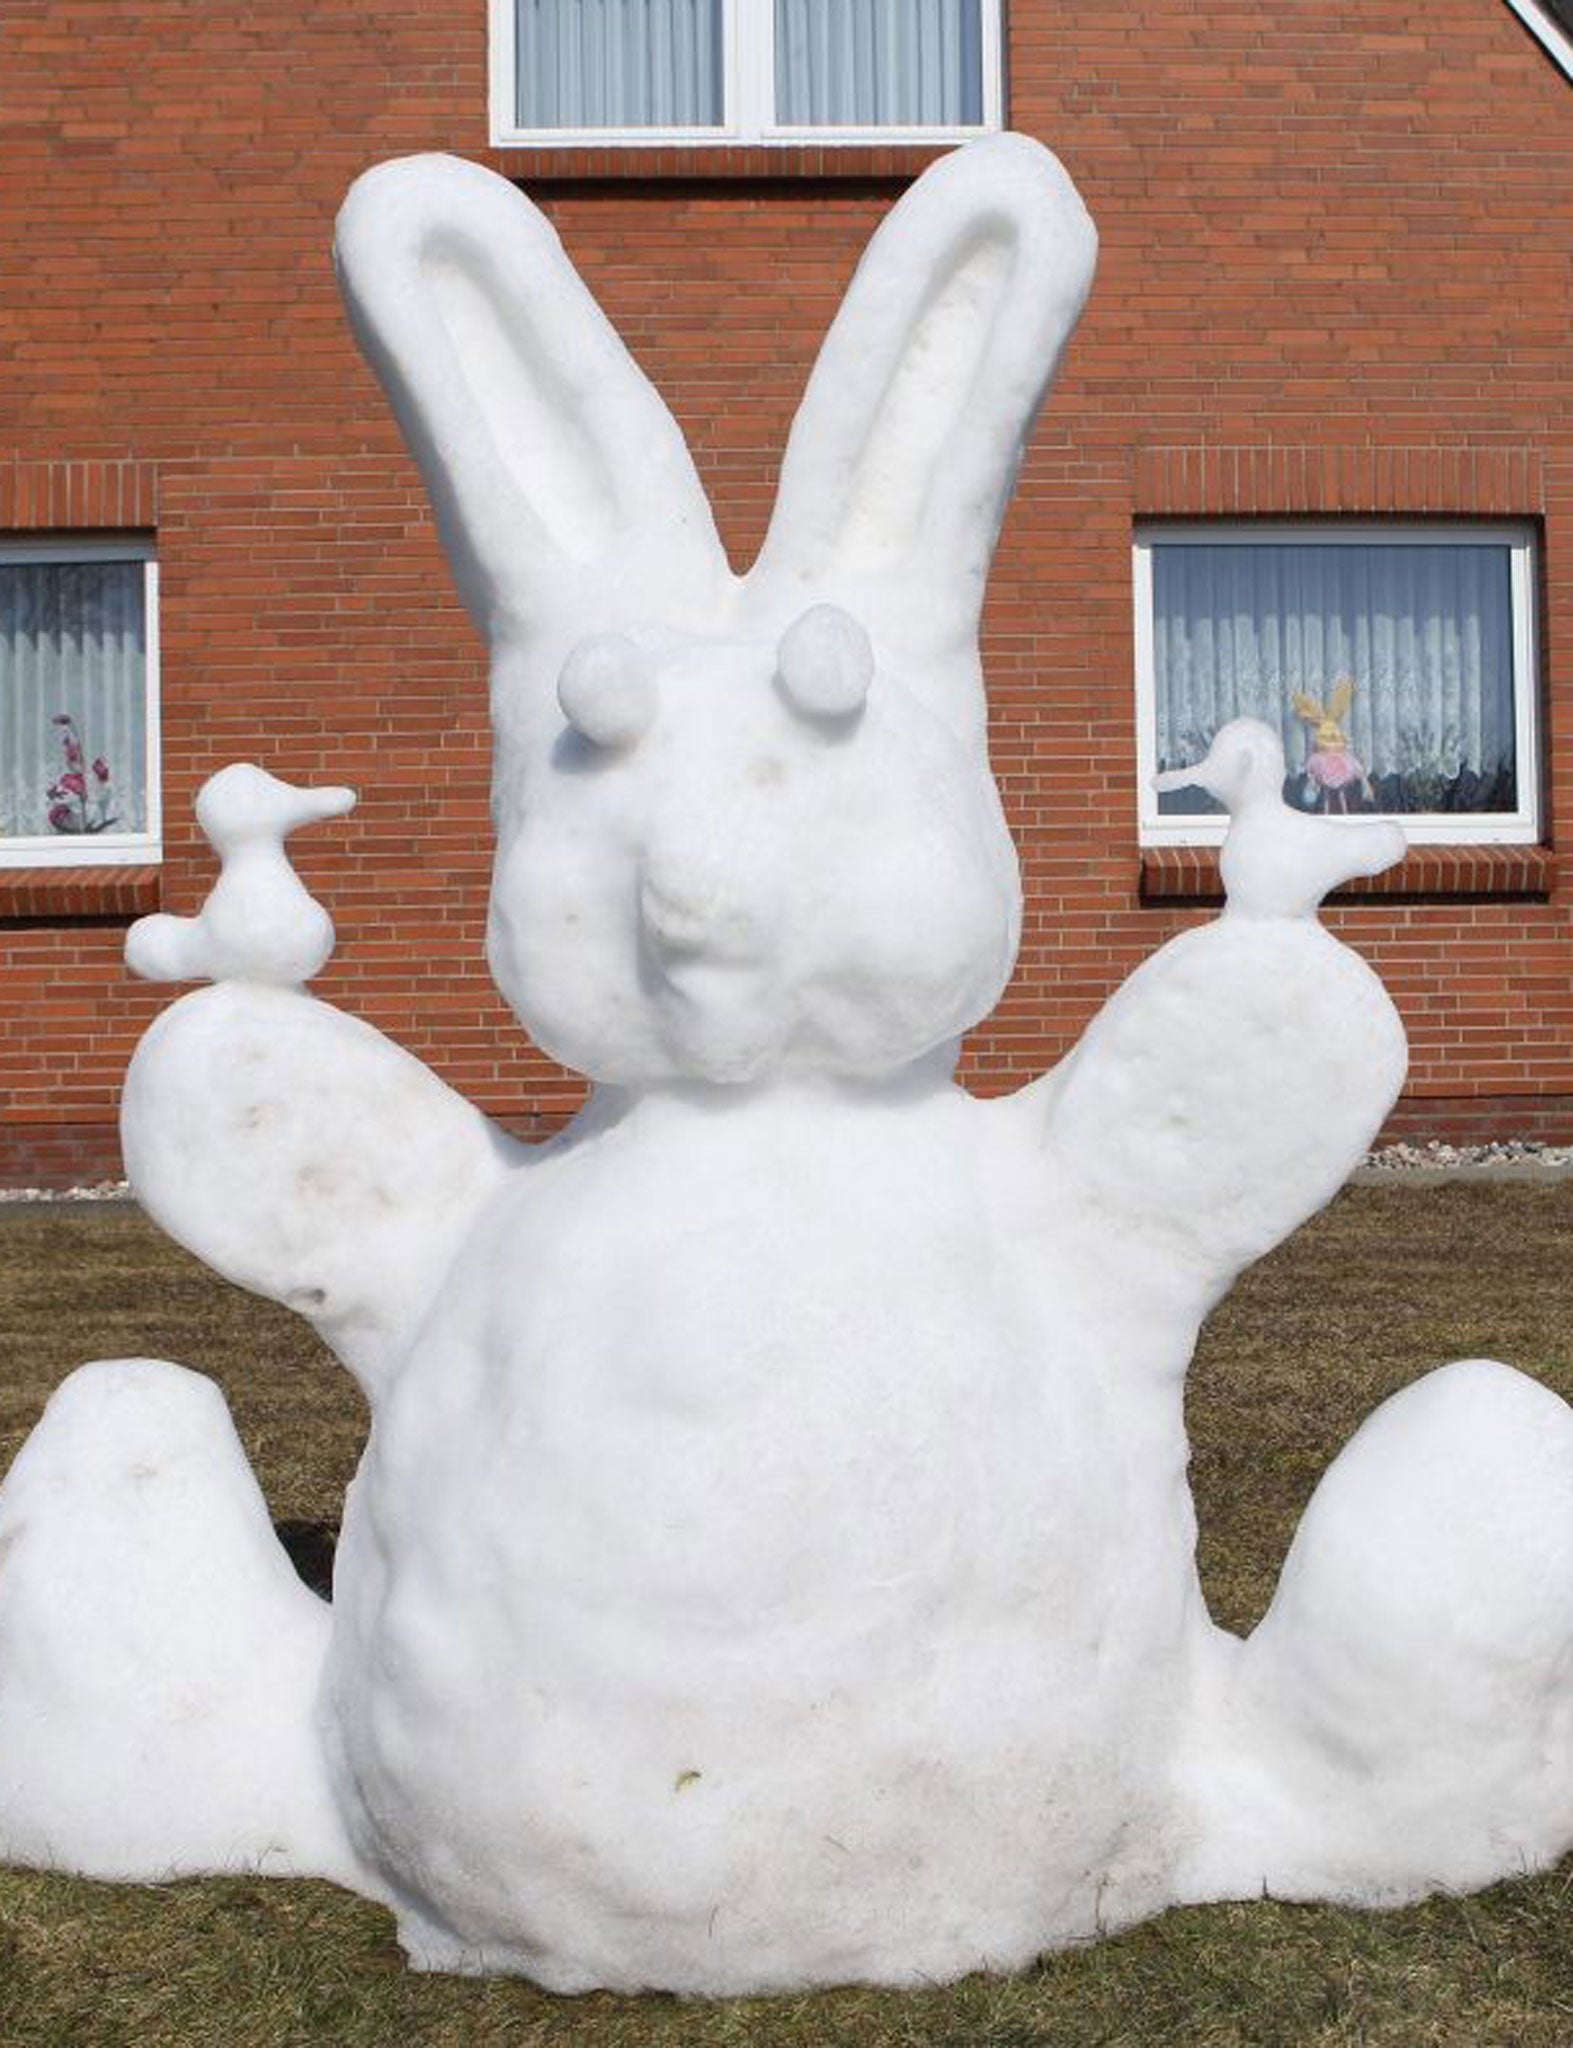 An Easter bunny made of snow in a garden in Oster-Ohrstedt, northern Germany today